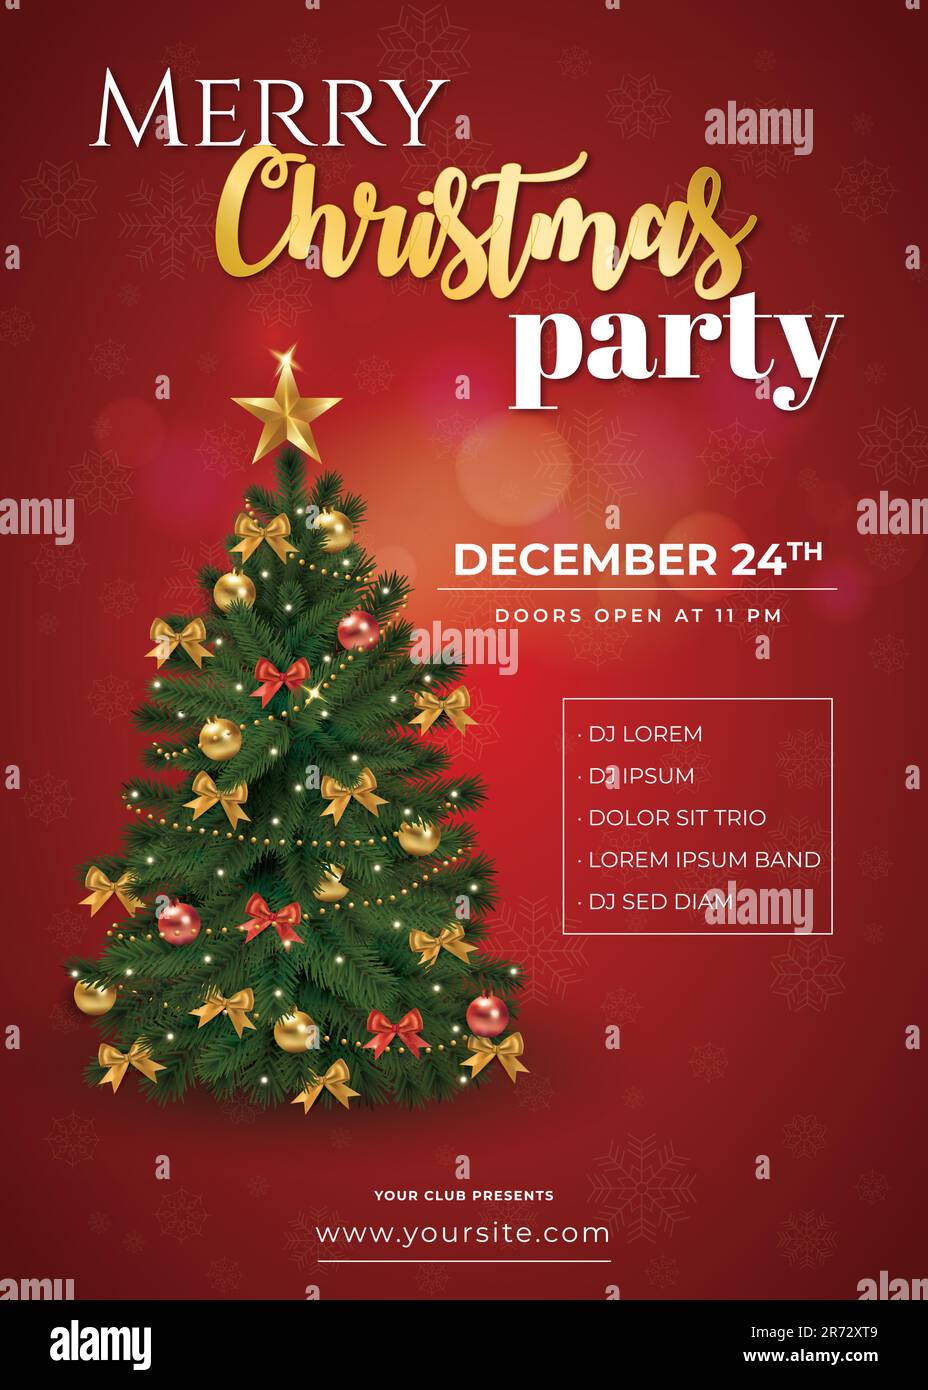 Merry Christmas Party and Party poster with Christmas tree on red background invitation theme concept. New year greeting poster and card design. Stock Vector